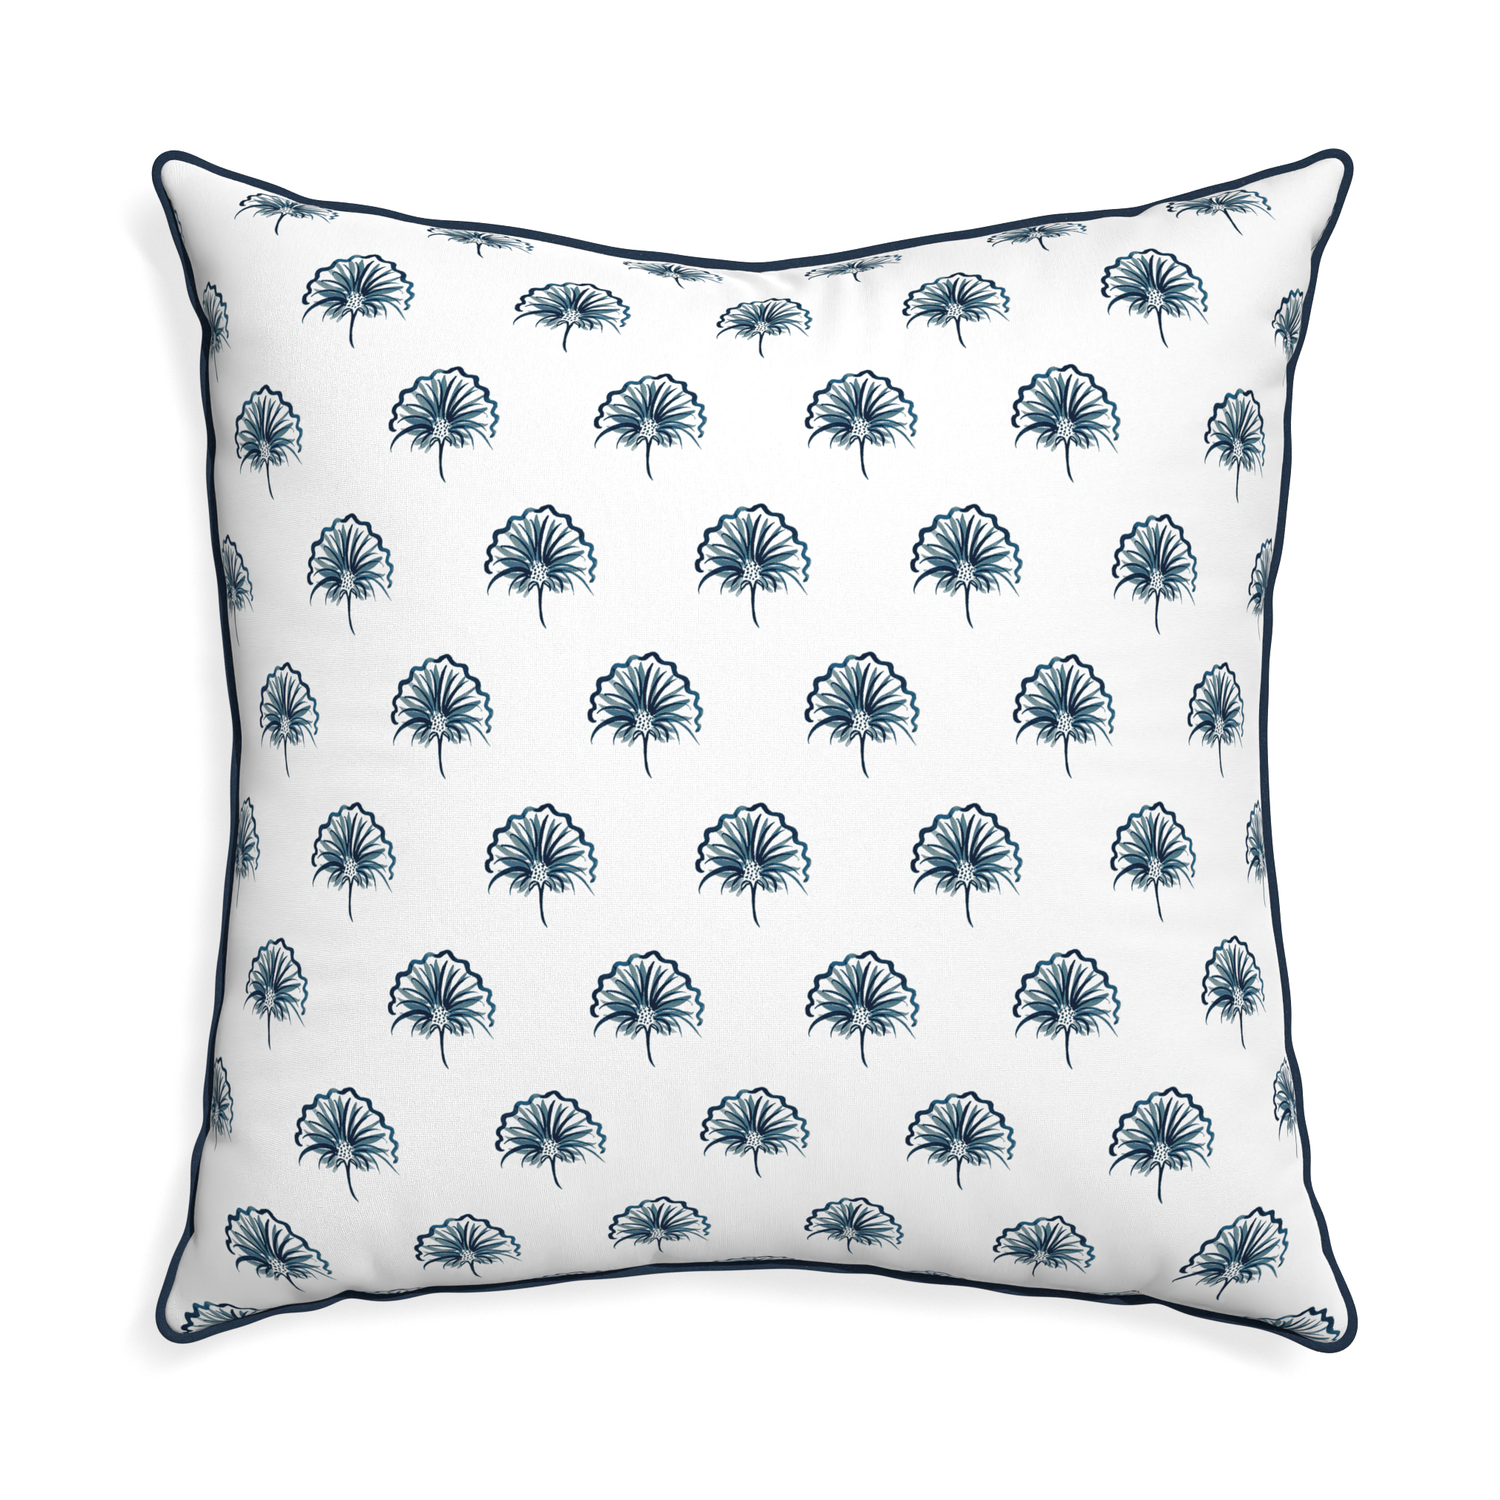 Euro-sham penelope midnight custom floral navypillow with c piping on white background